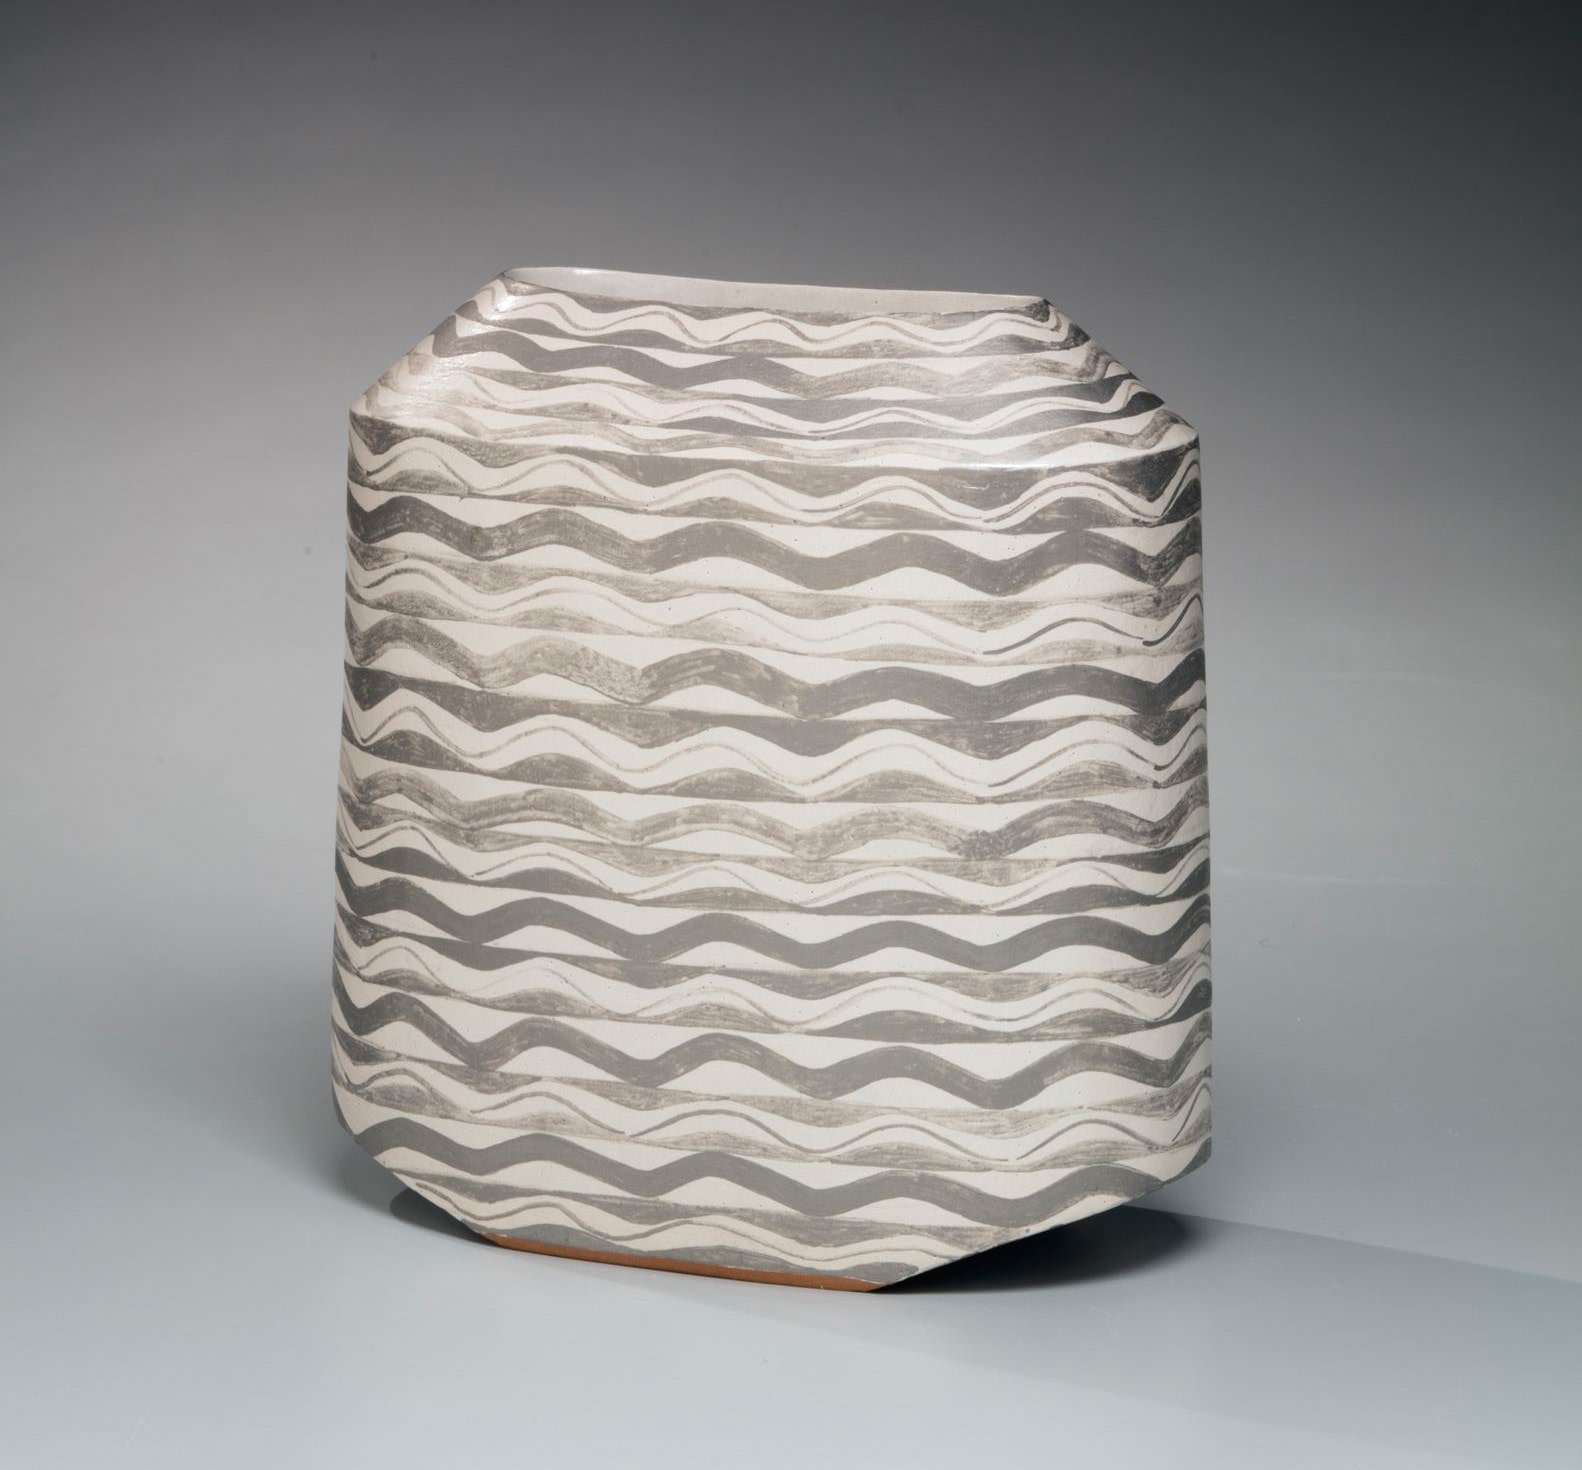 Vase with wavy pattern in silver, ca. 1982